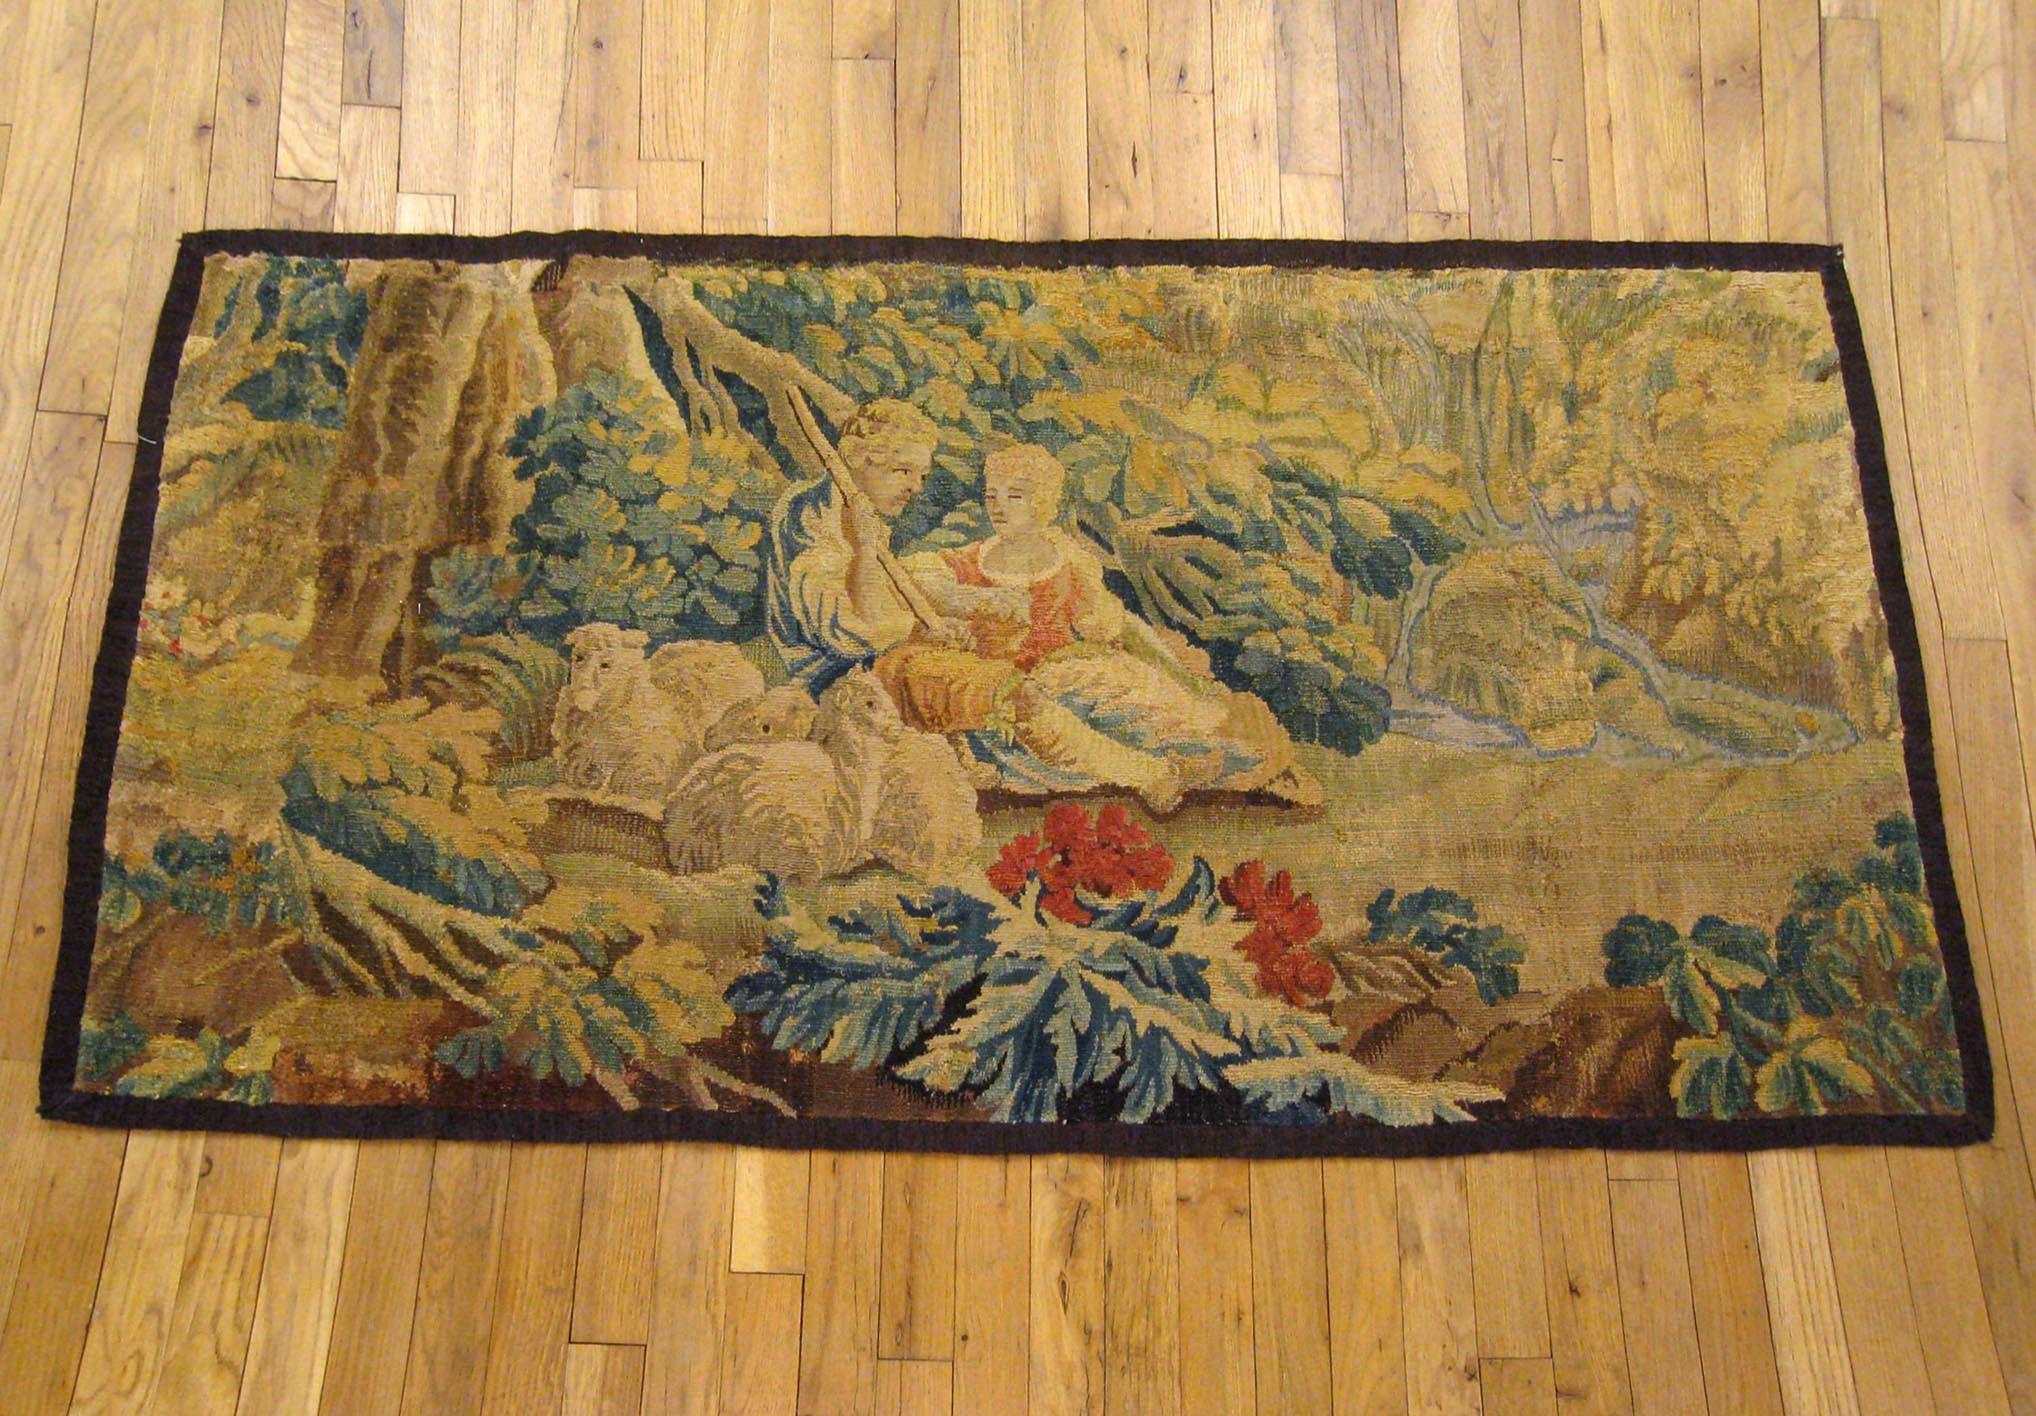 A French pastoral landscape tapestry from the 18th century, envisioning a placid scene in which a shepherd and shepherdess repose under a large tree with three of their sheep within an idyllic forest setting, with a waterfall and stream in the right